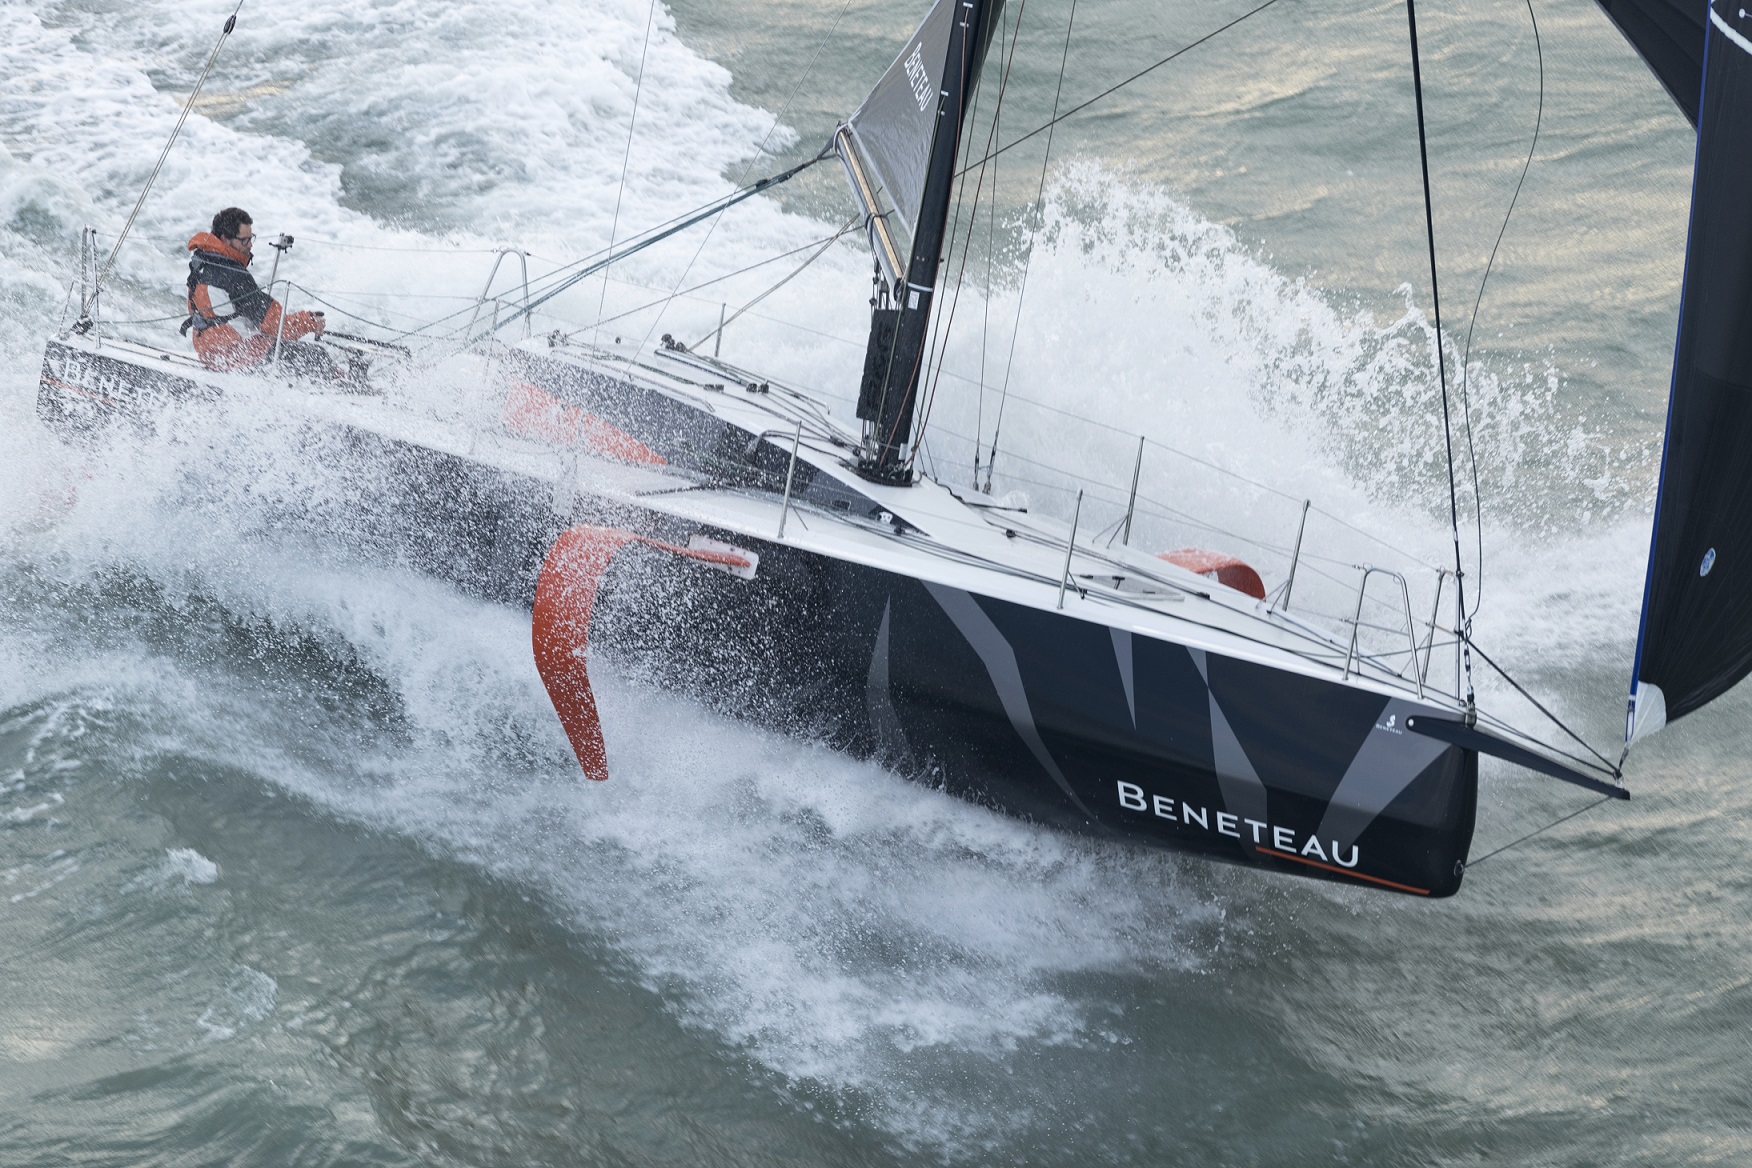 The new C-TAPE has been used to reinforce the foils of the Figaro Beneteau 3, reportedly the first production foiling one-design monohull ever made.